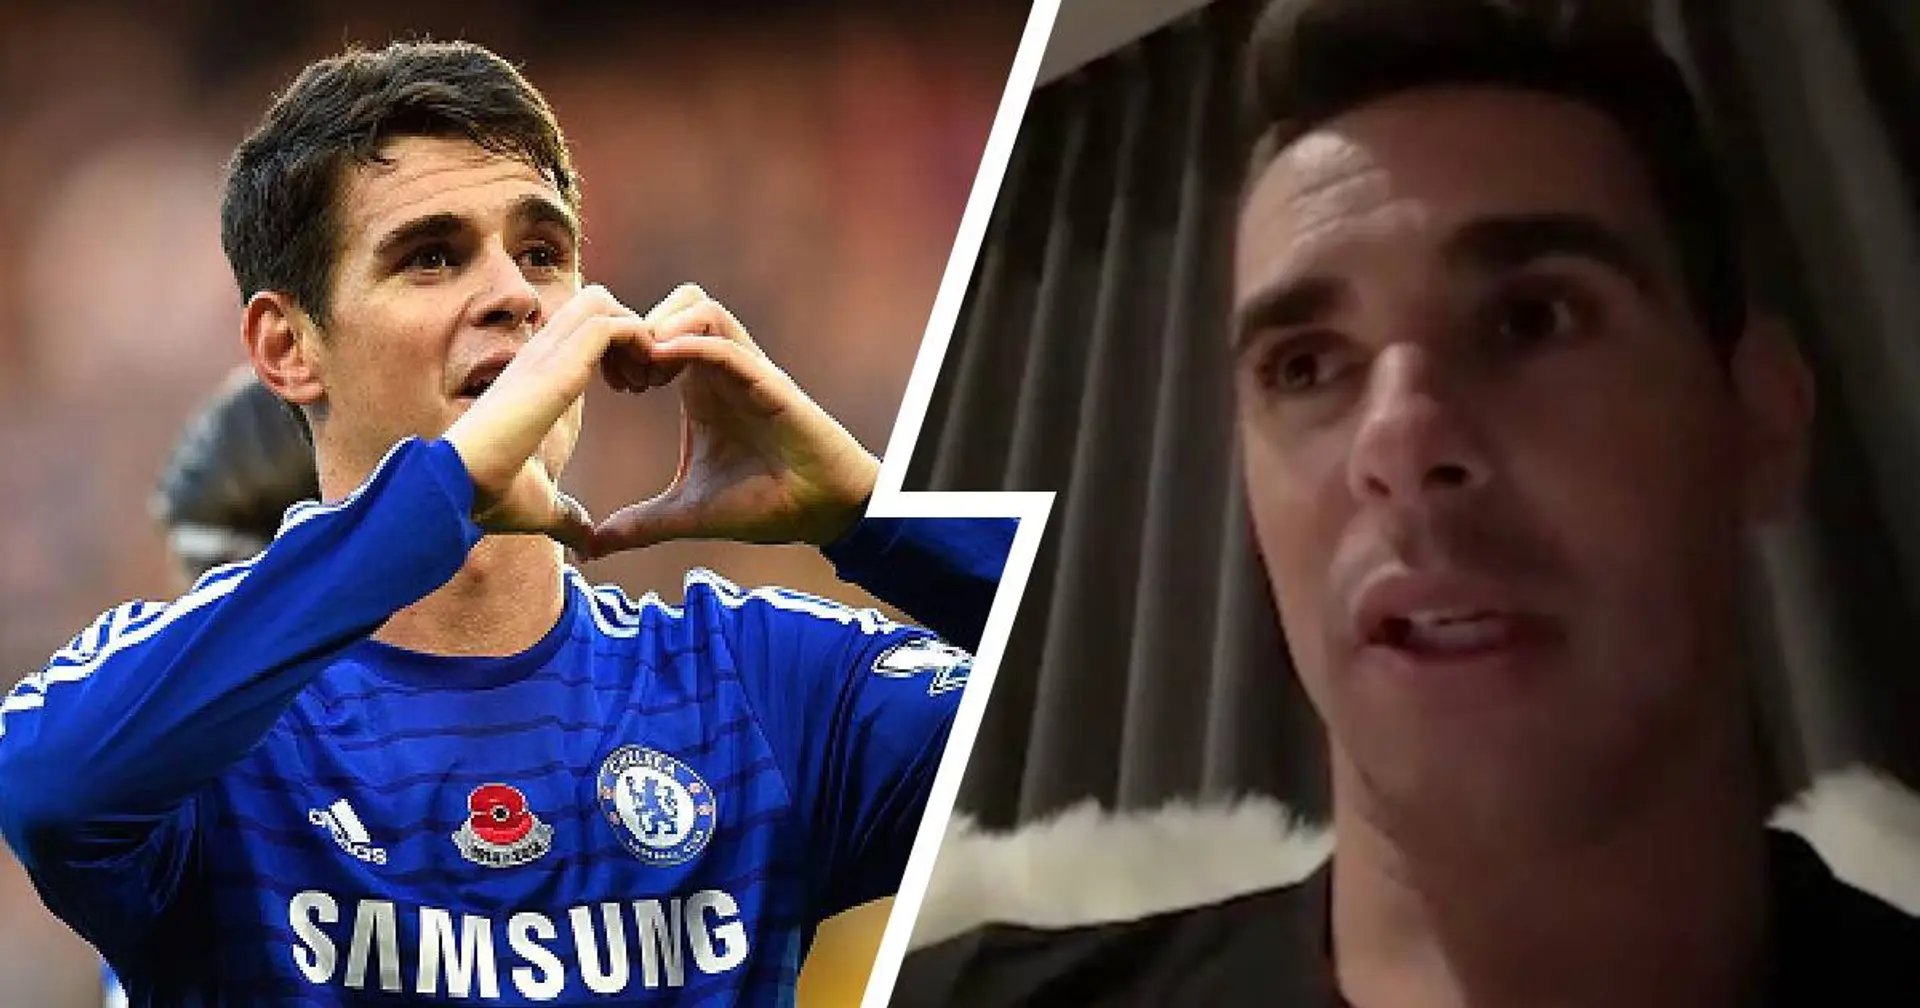 Oscar: 'If I had the chance, I'd like to finish my career at Chelsea - it's a dream for me'